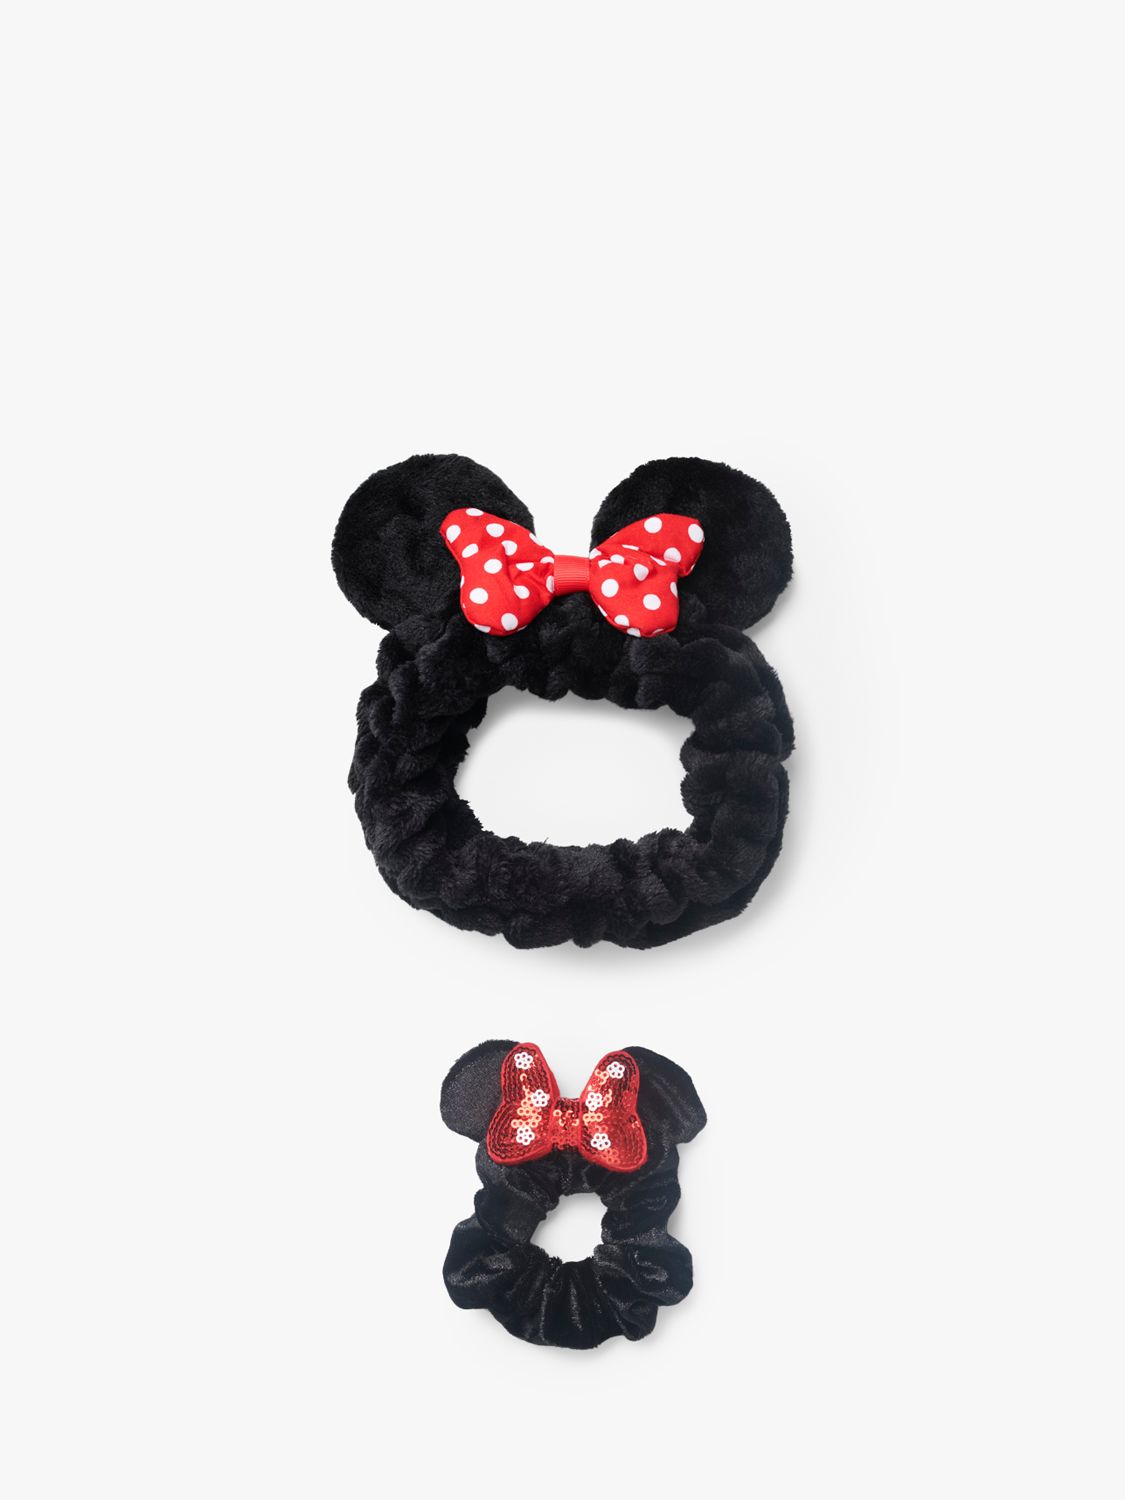 Buy Small Stuff Kids' Minnie Mouse Headband and Scrunchie Set, Pack of 2 Online at johnlewis.com